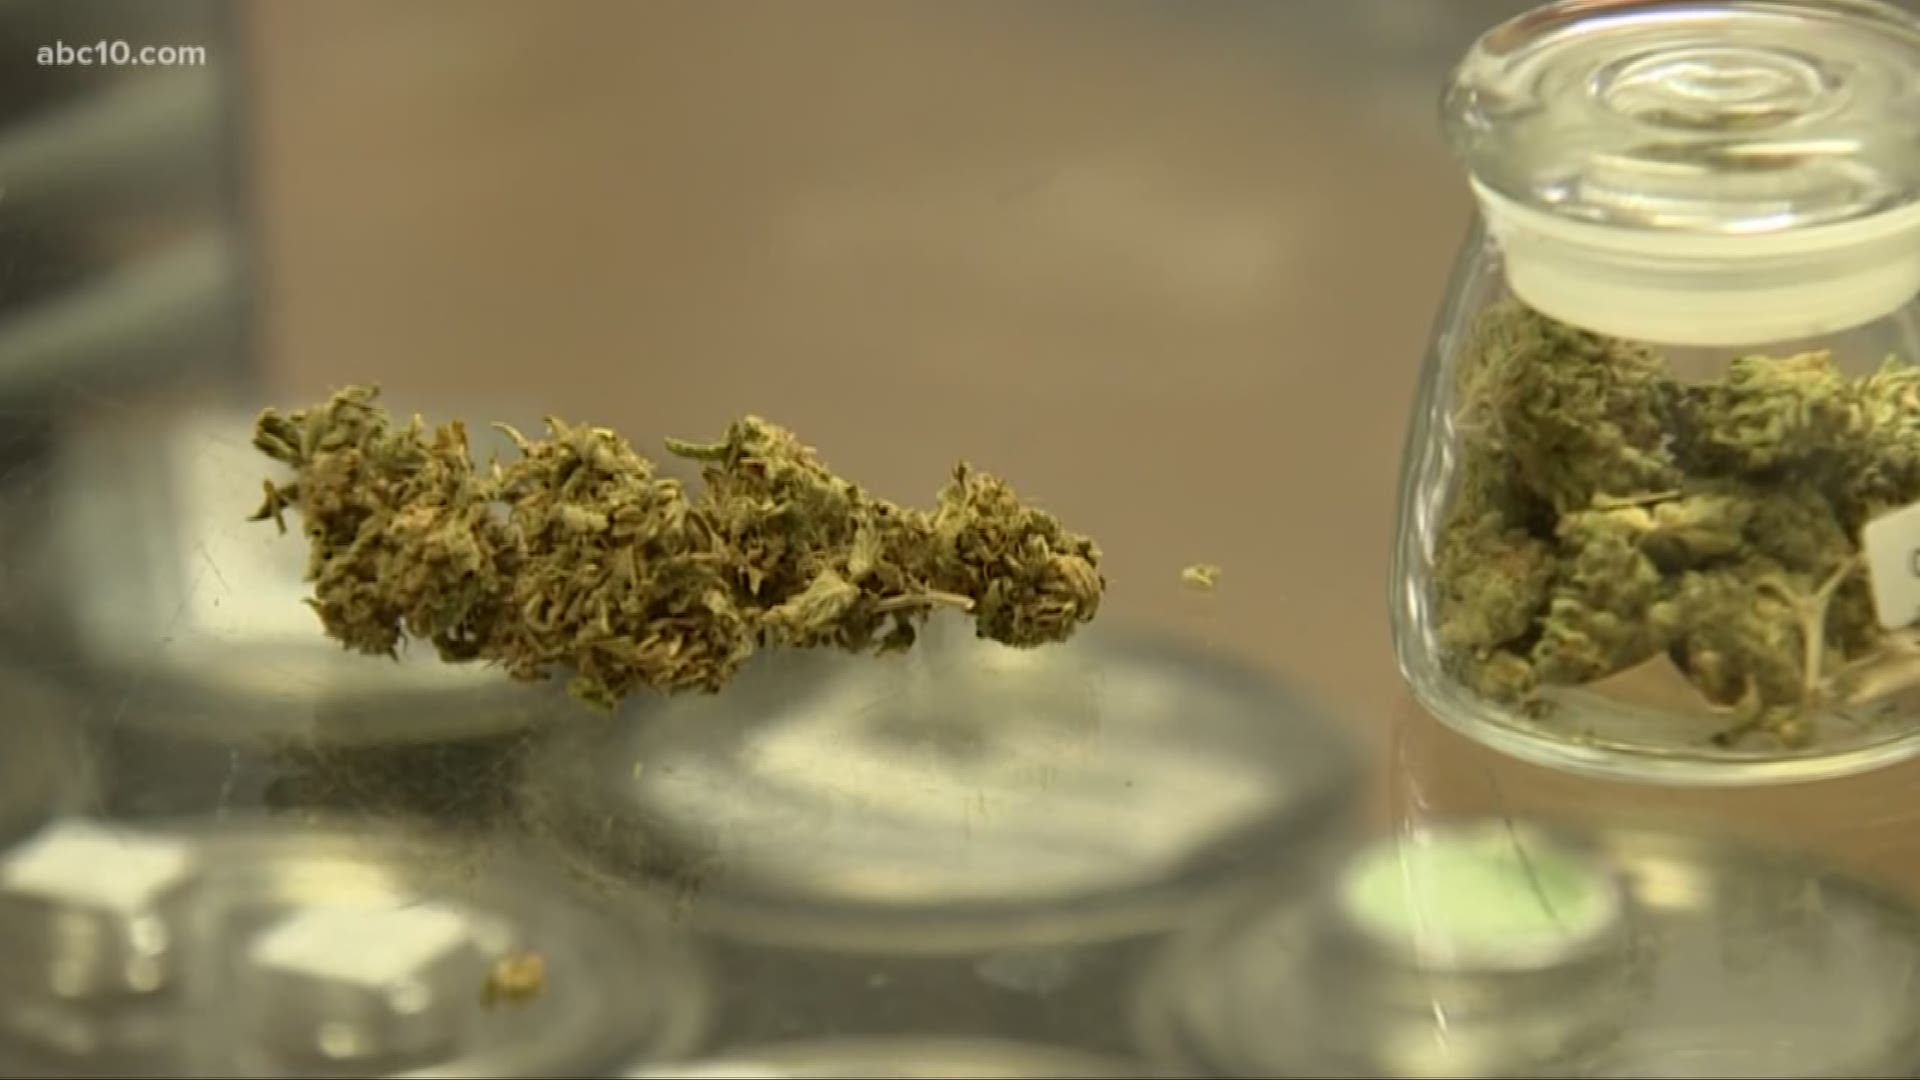 San Joaquin County is one step closer to allowing retail marijuana into the unincorporated parts of the county. On Thursday, the county's Planning Commission will be voting on some land use and location rules, which is the last step before the project heads to the Board of Supervisors for final approval.